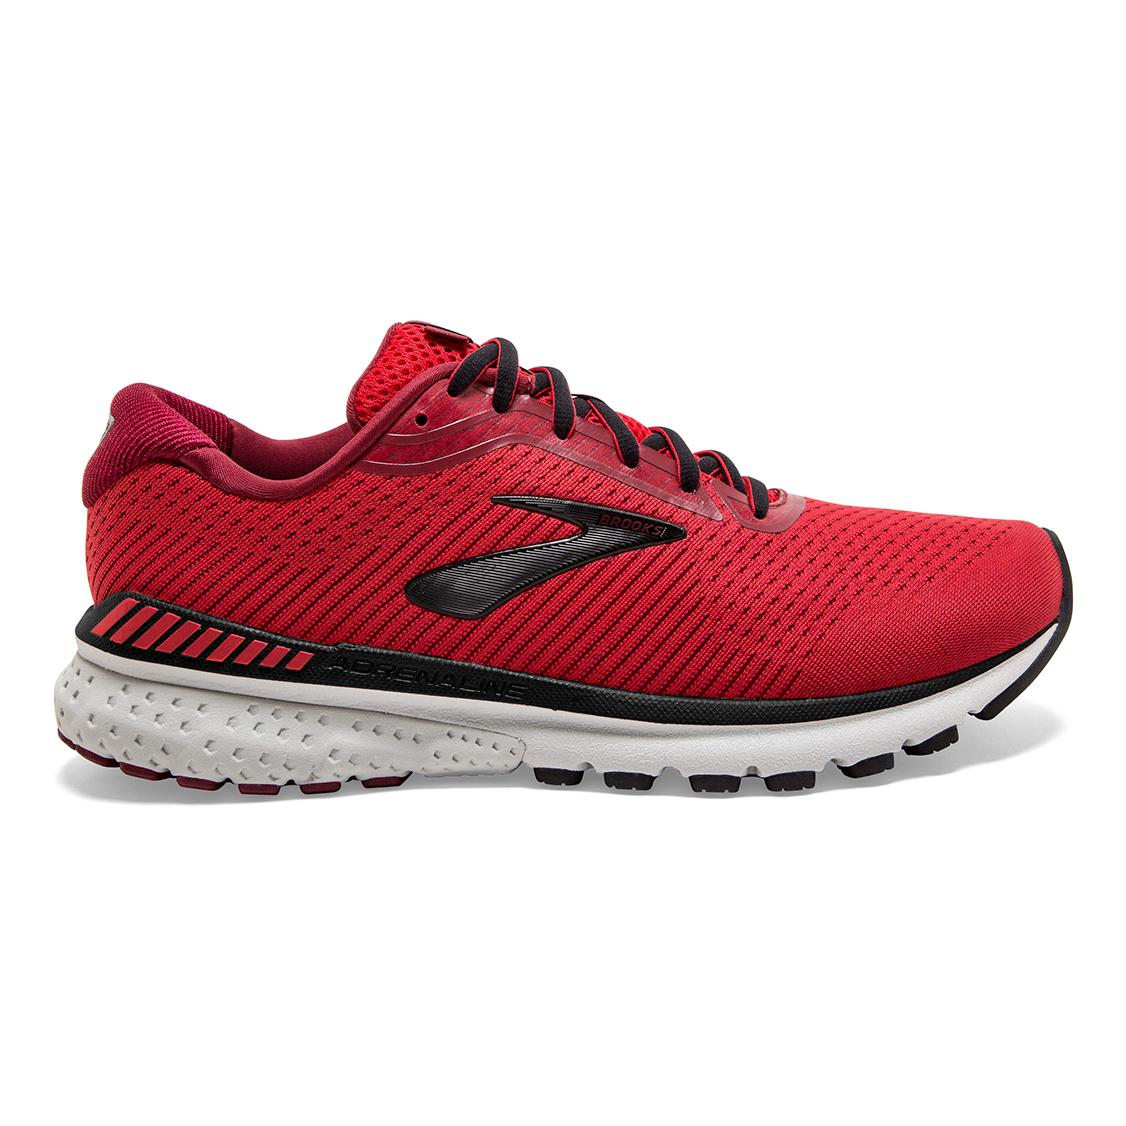 brooks shoes red